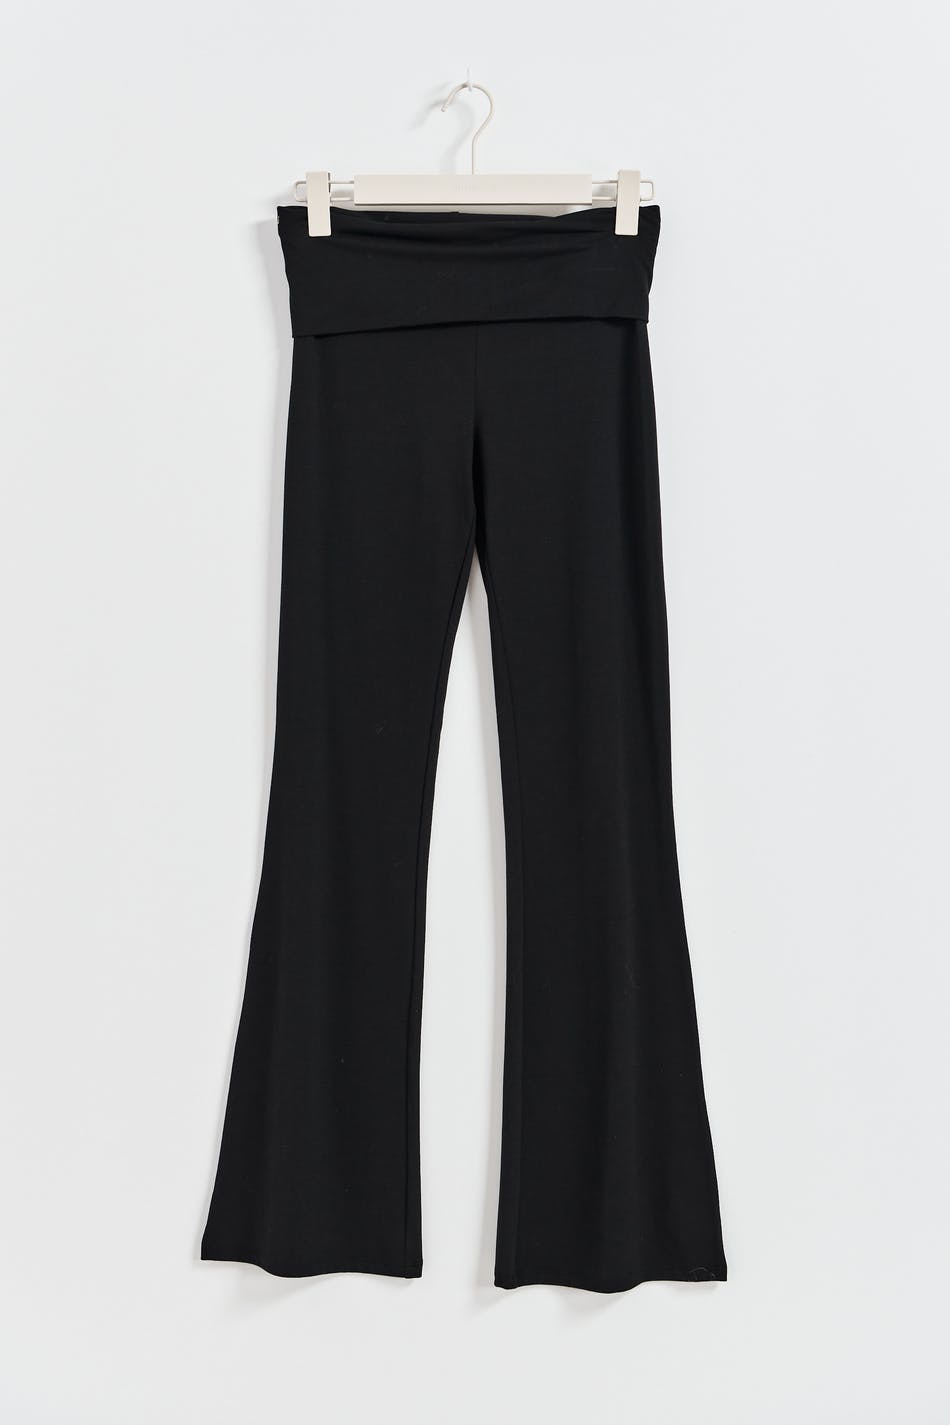 Gina Tricot - Soft touch petite folded flare trousers - yoga-pants - Black - S - Female